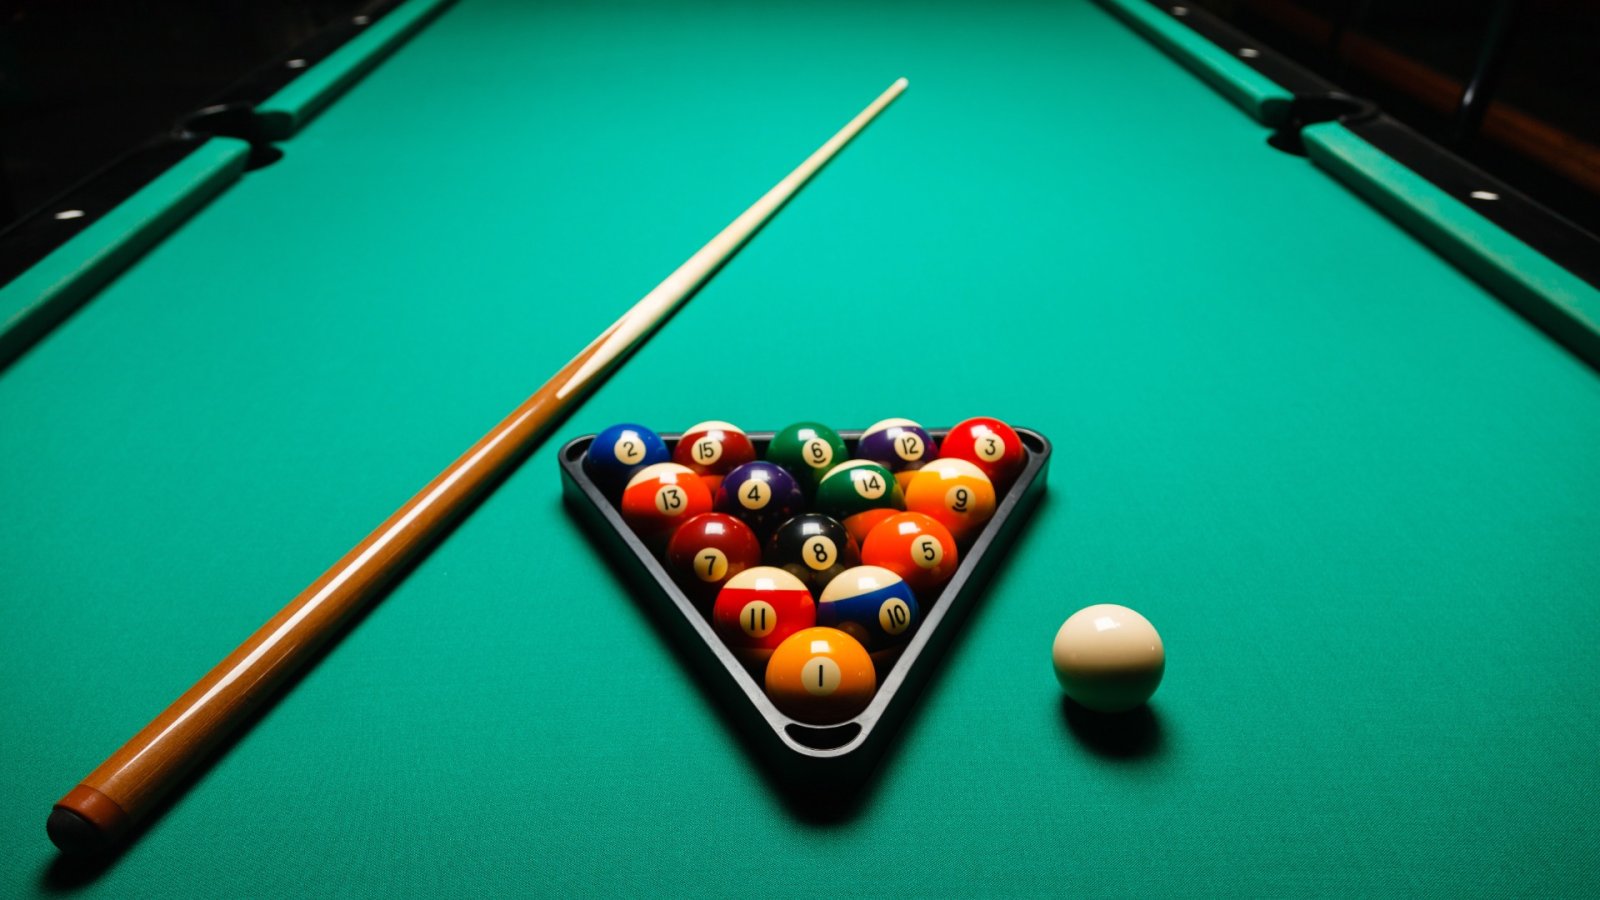 Billiards and pool throughout history